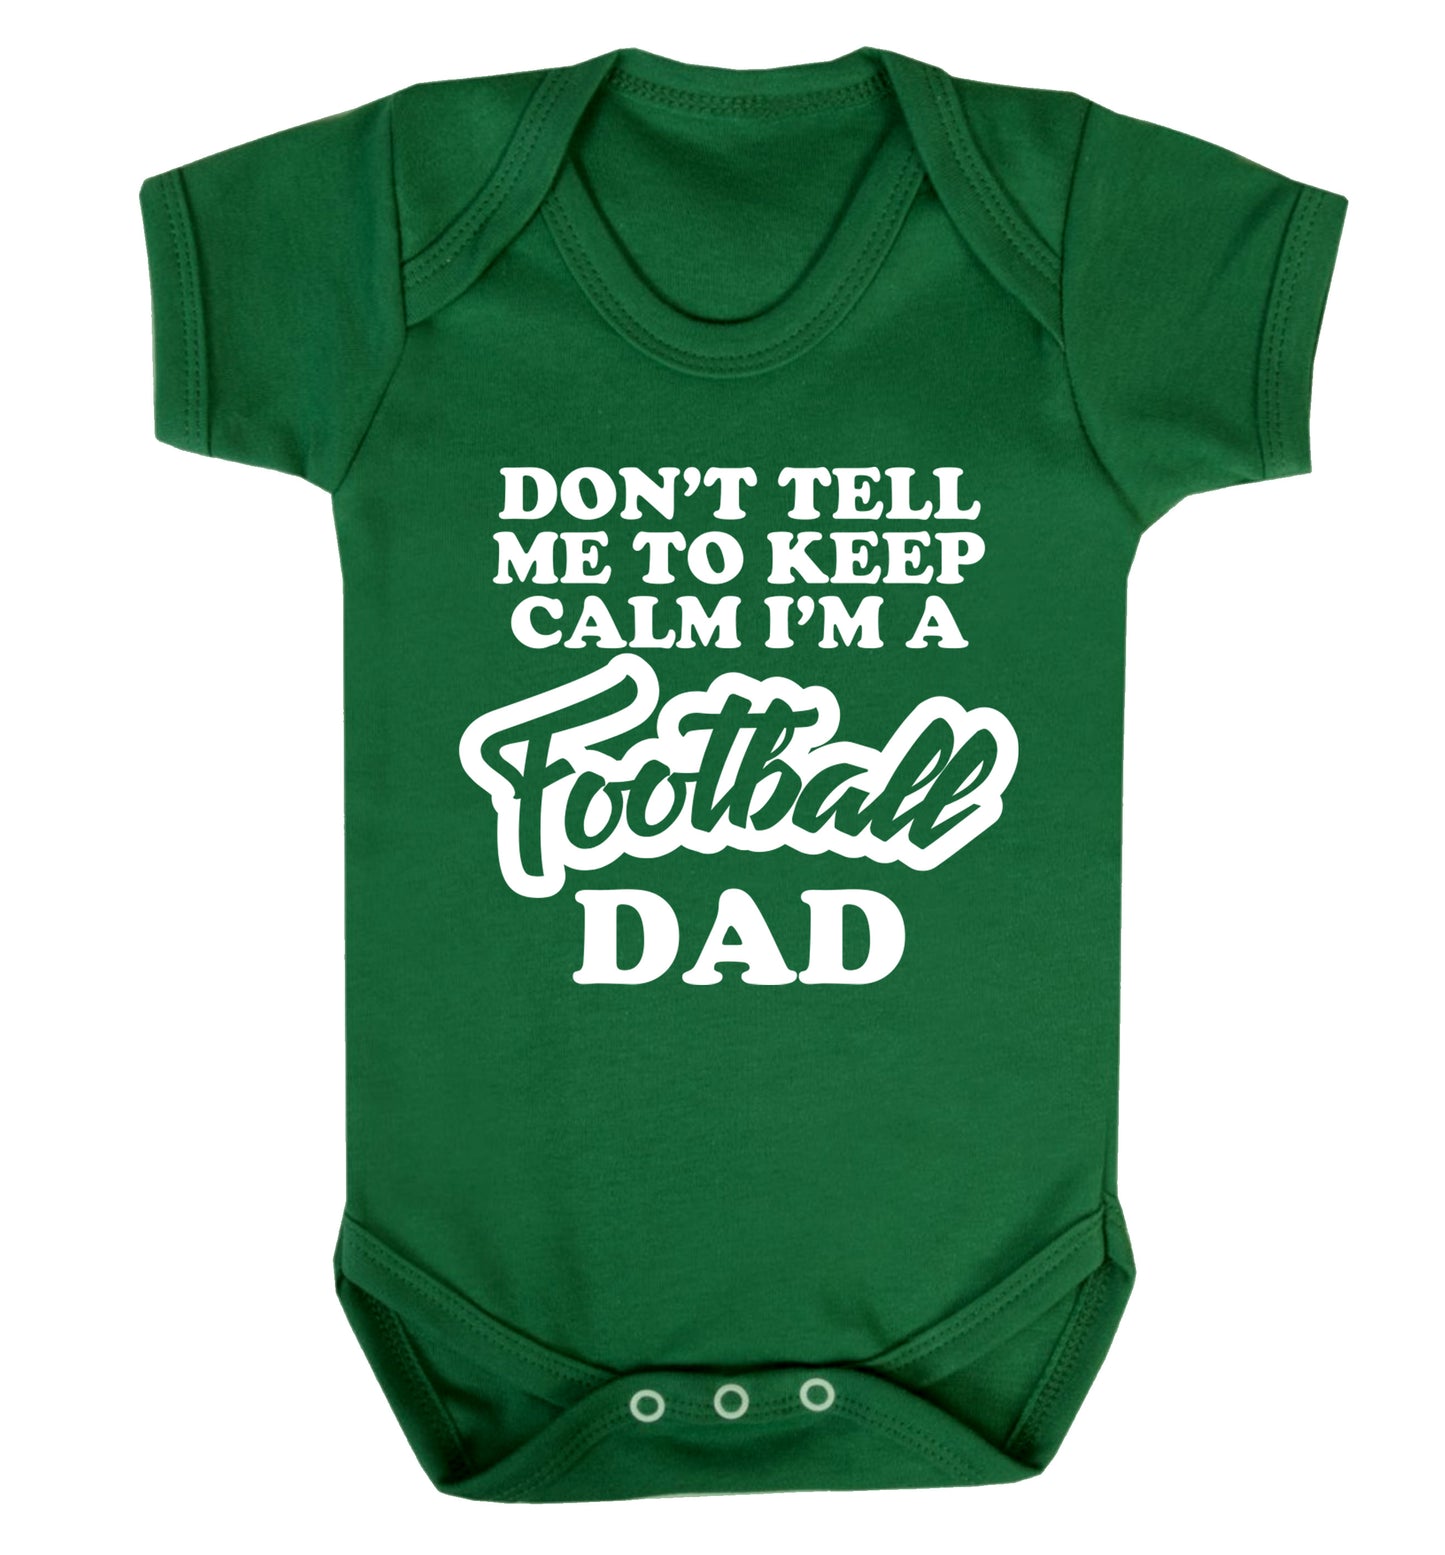 Don't tell me to keep calm I'm a football dad Baby Vest green 18-24 months